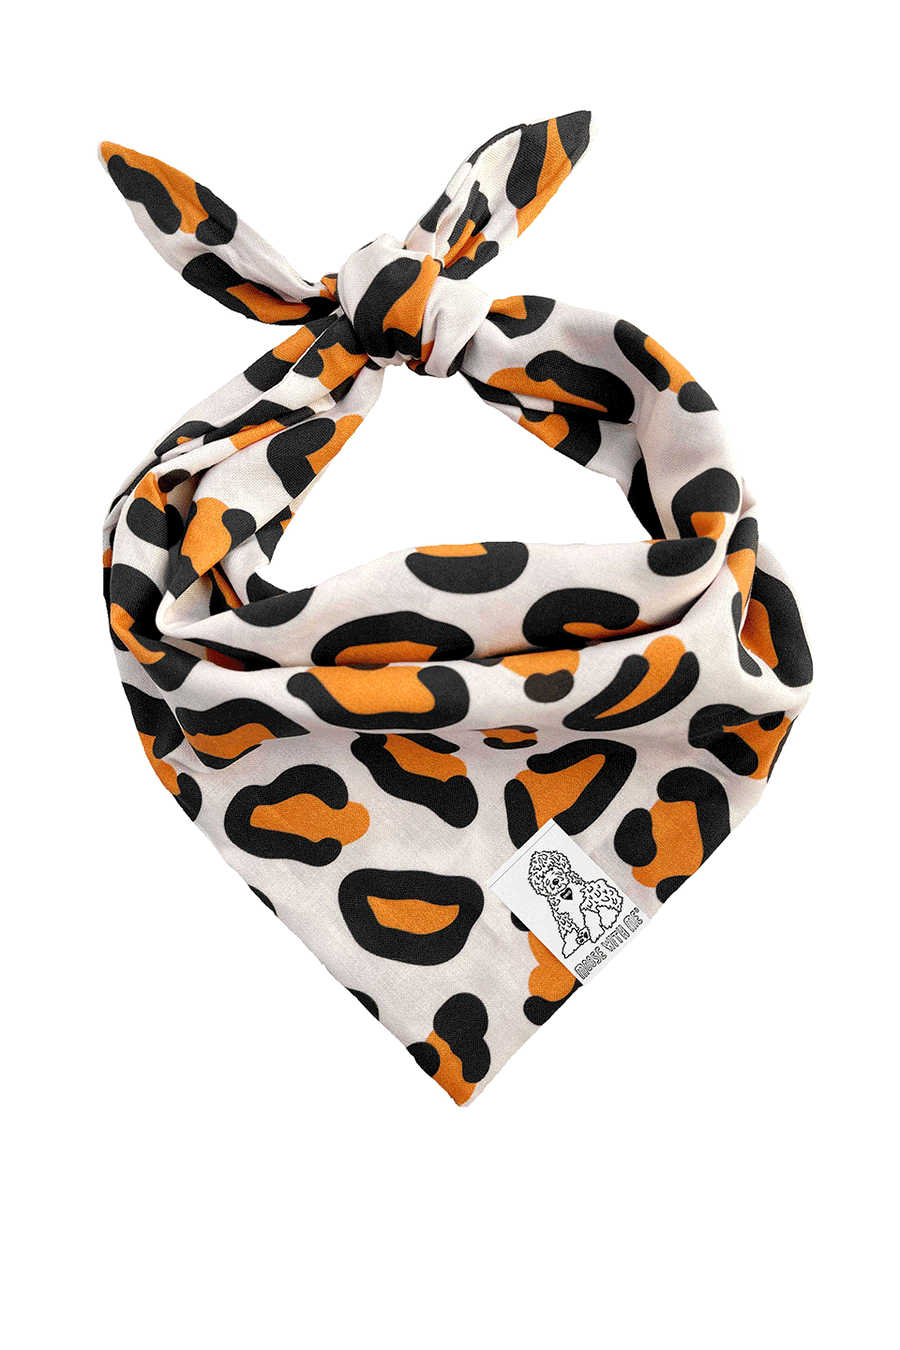 Dog Bandana Leopard Print - Customize with Interchangeable Velcro Patches